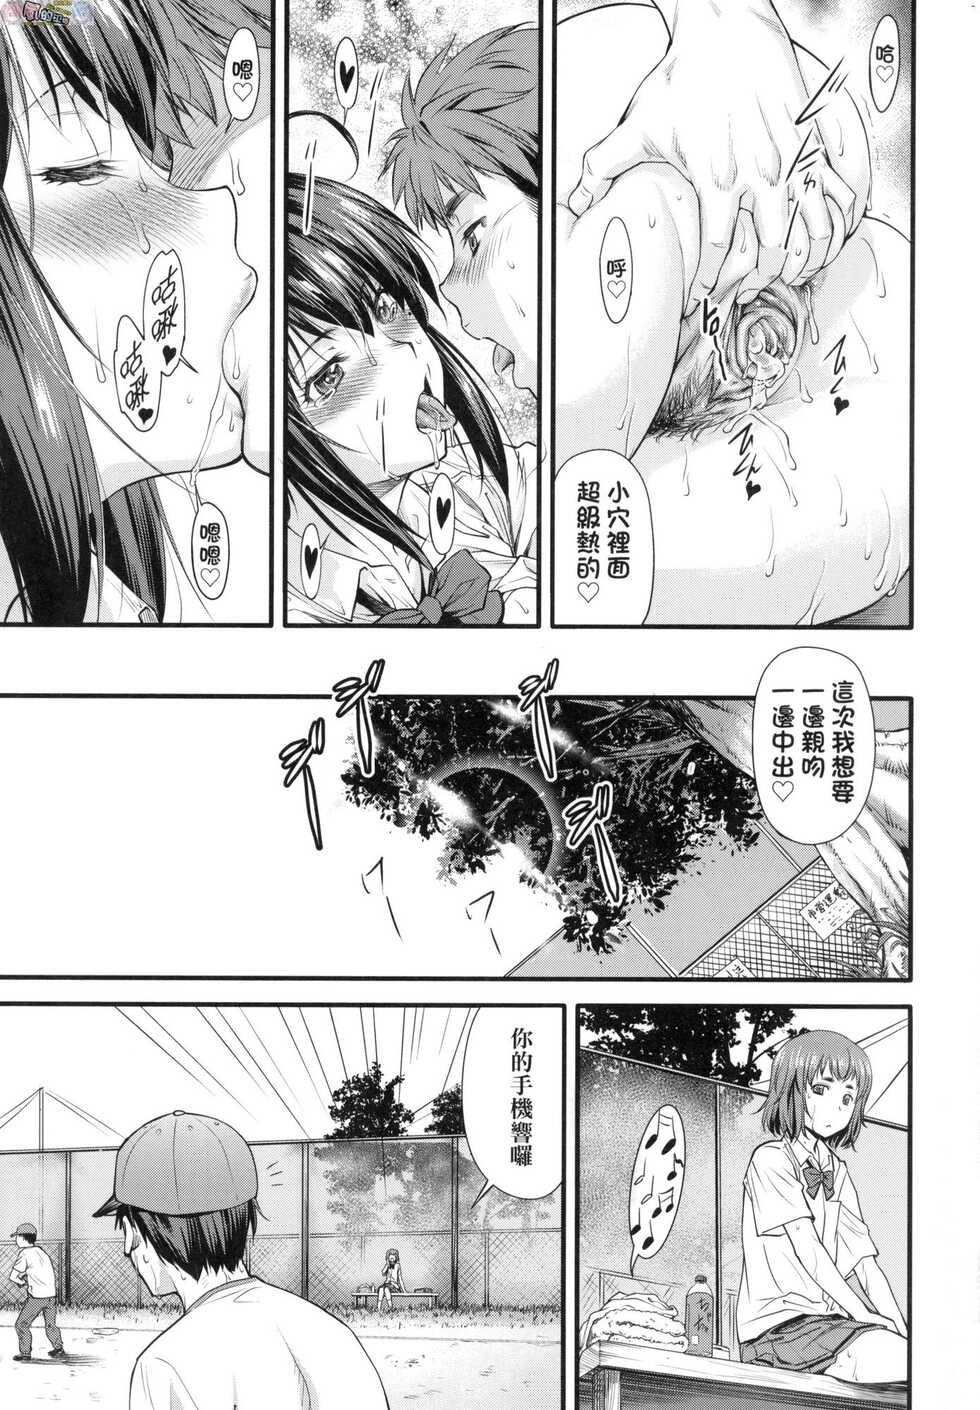 [Nagare Ippon] Kaname Date Chuu [Chinese] [Decensored] - Page 28